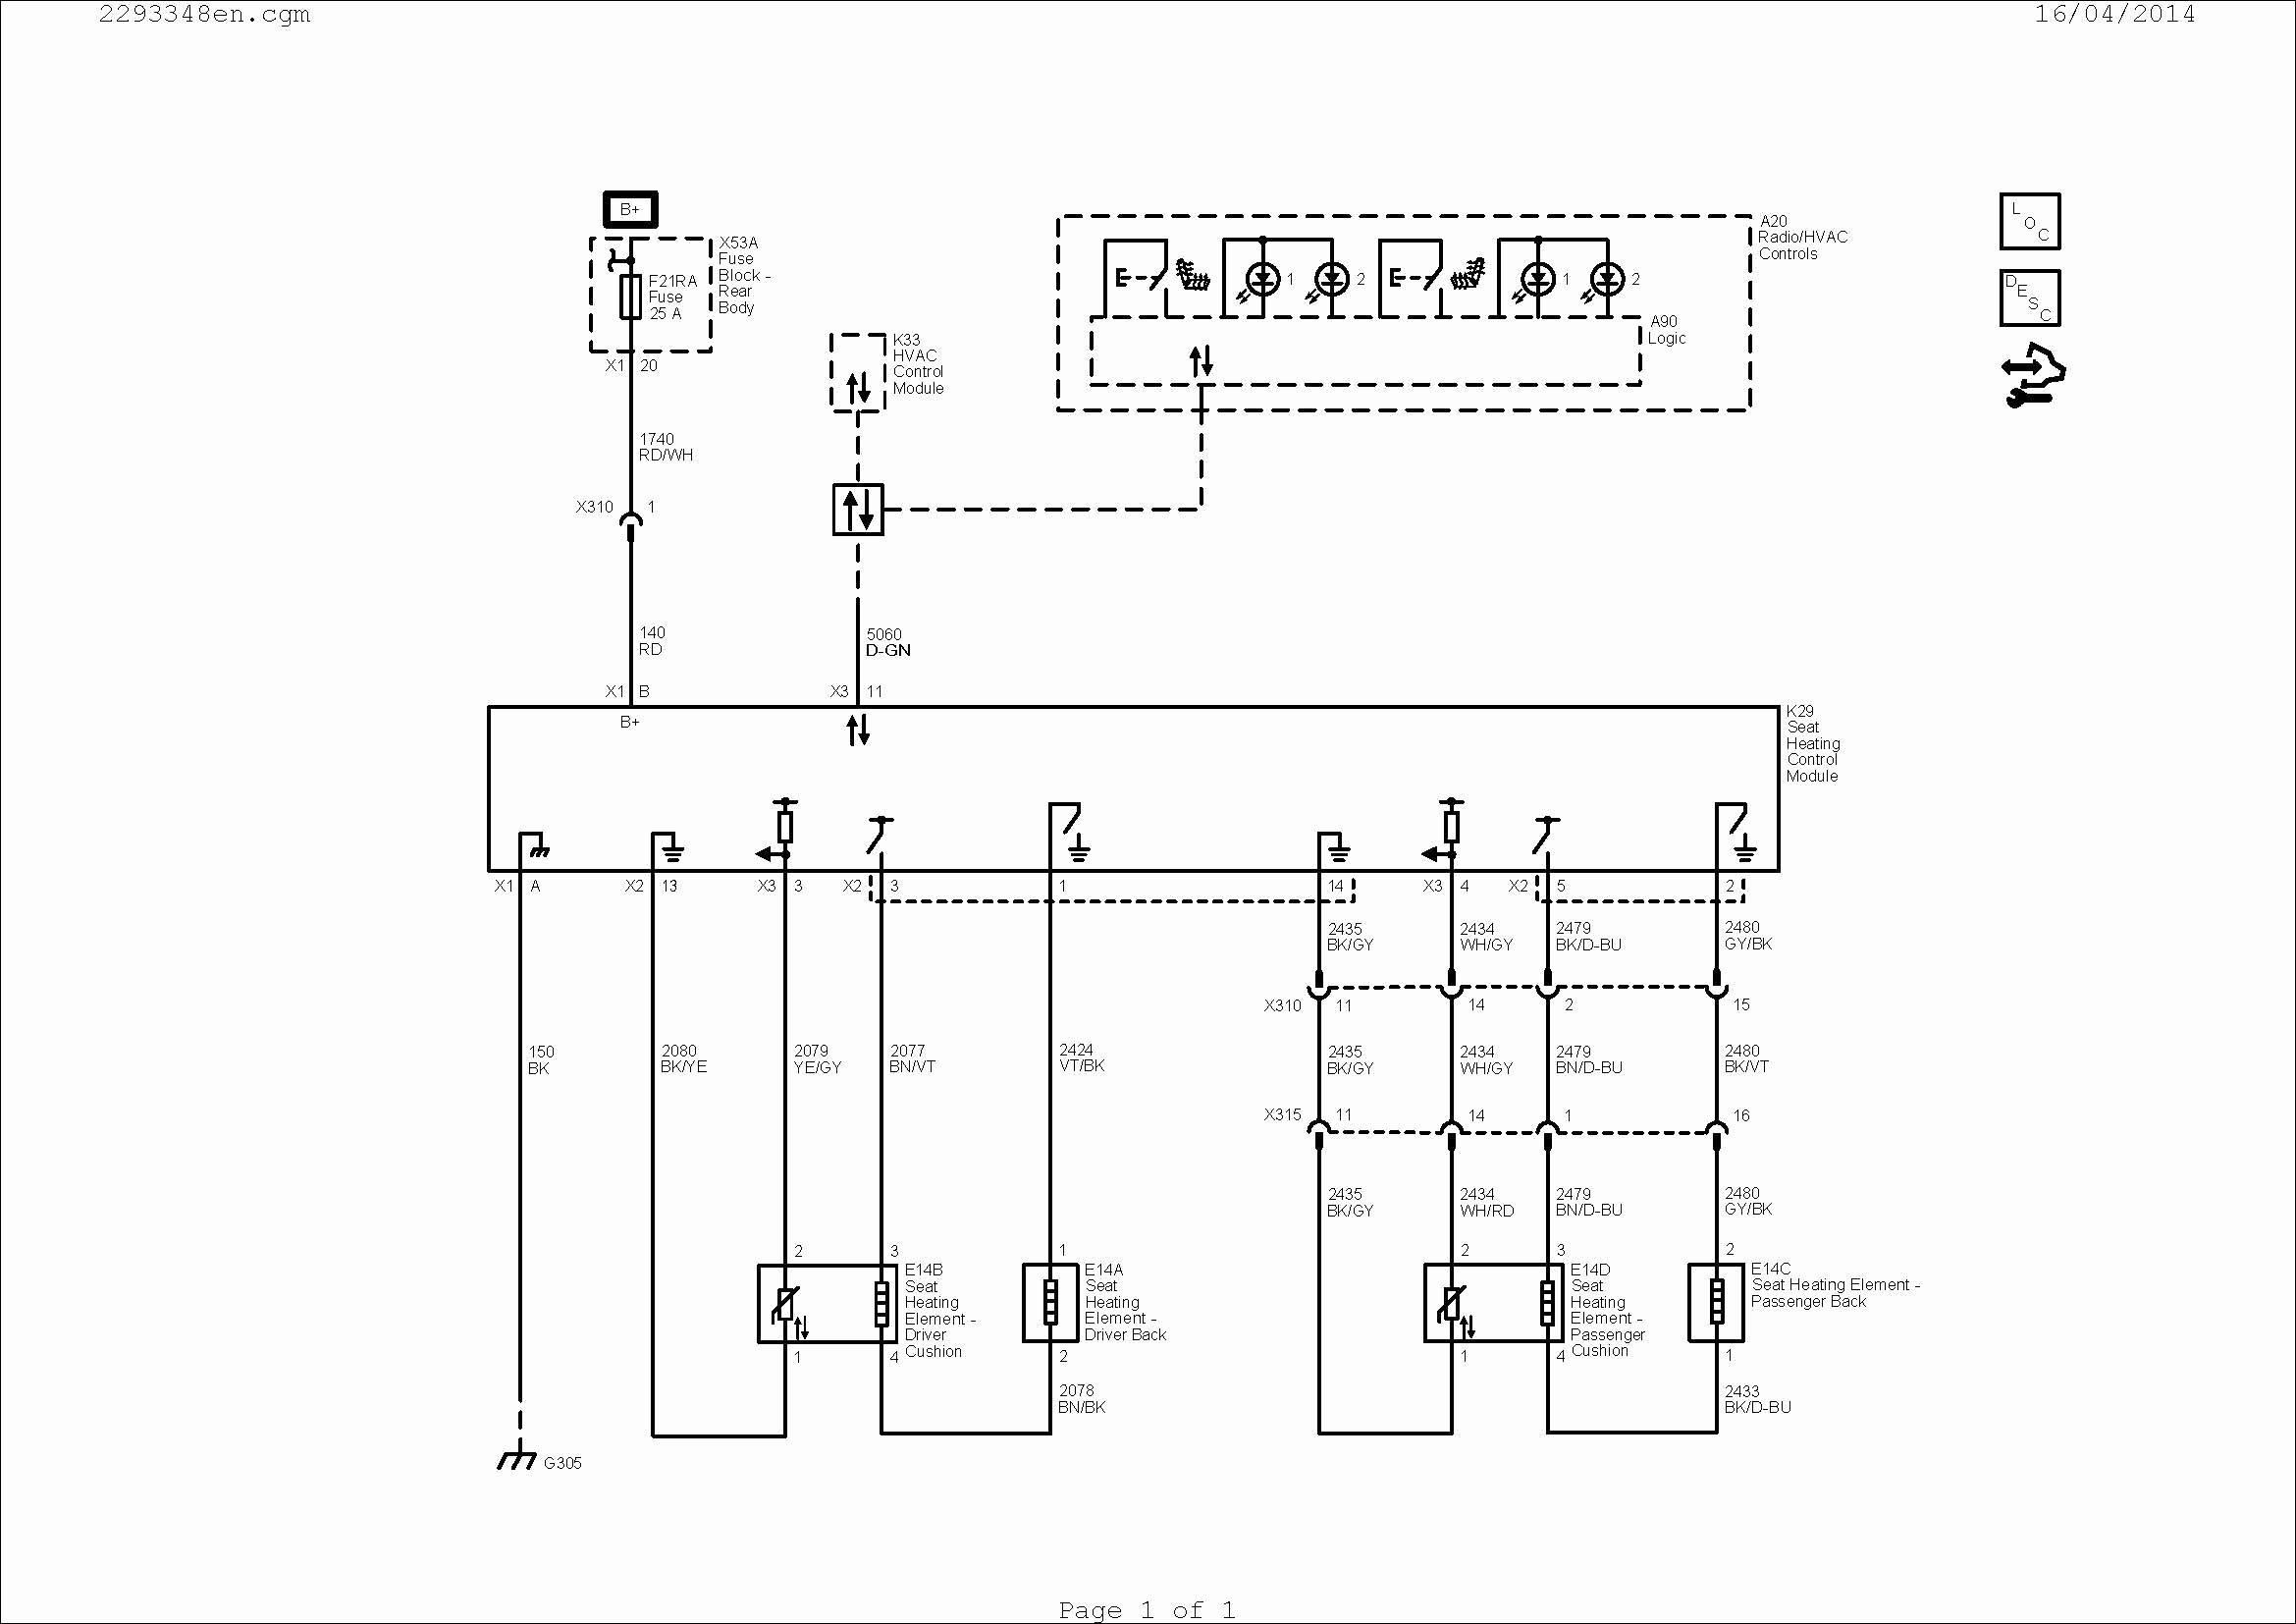 Pressure Switch for Well Pump Wiring Diagram Well Pump Switch – Circular Flow Diagram Of Pressure Switch for Well Pump Wiring Diagram